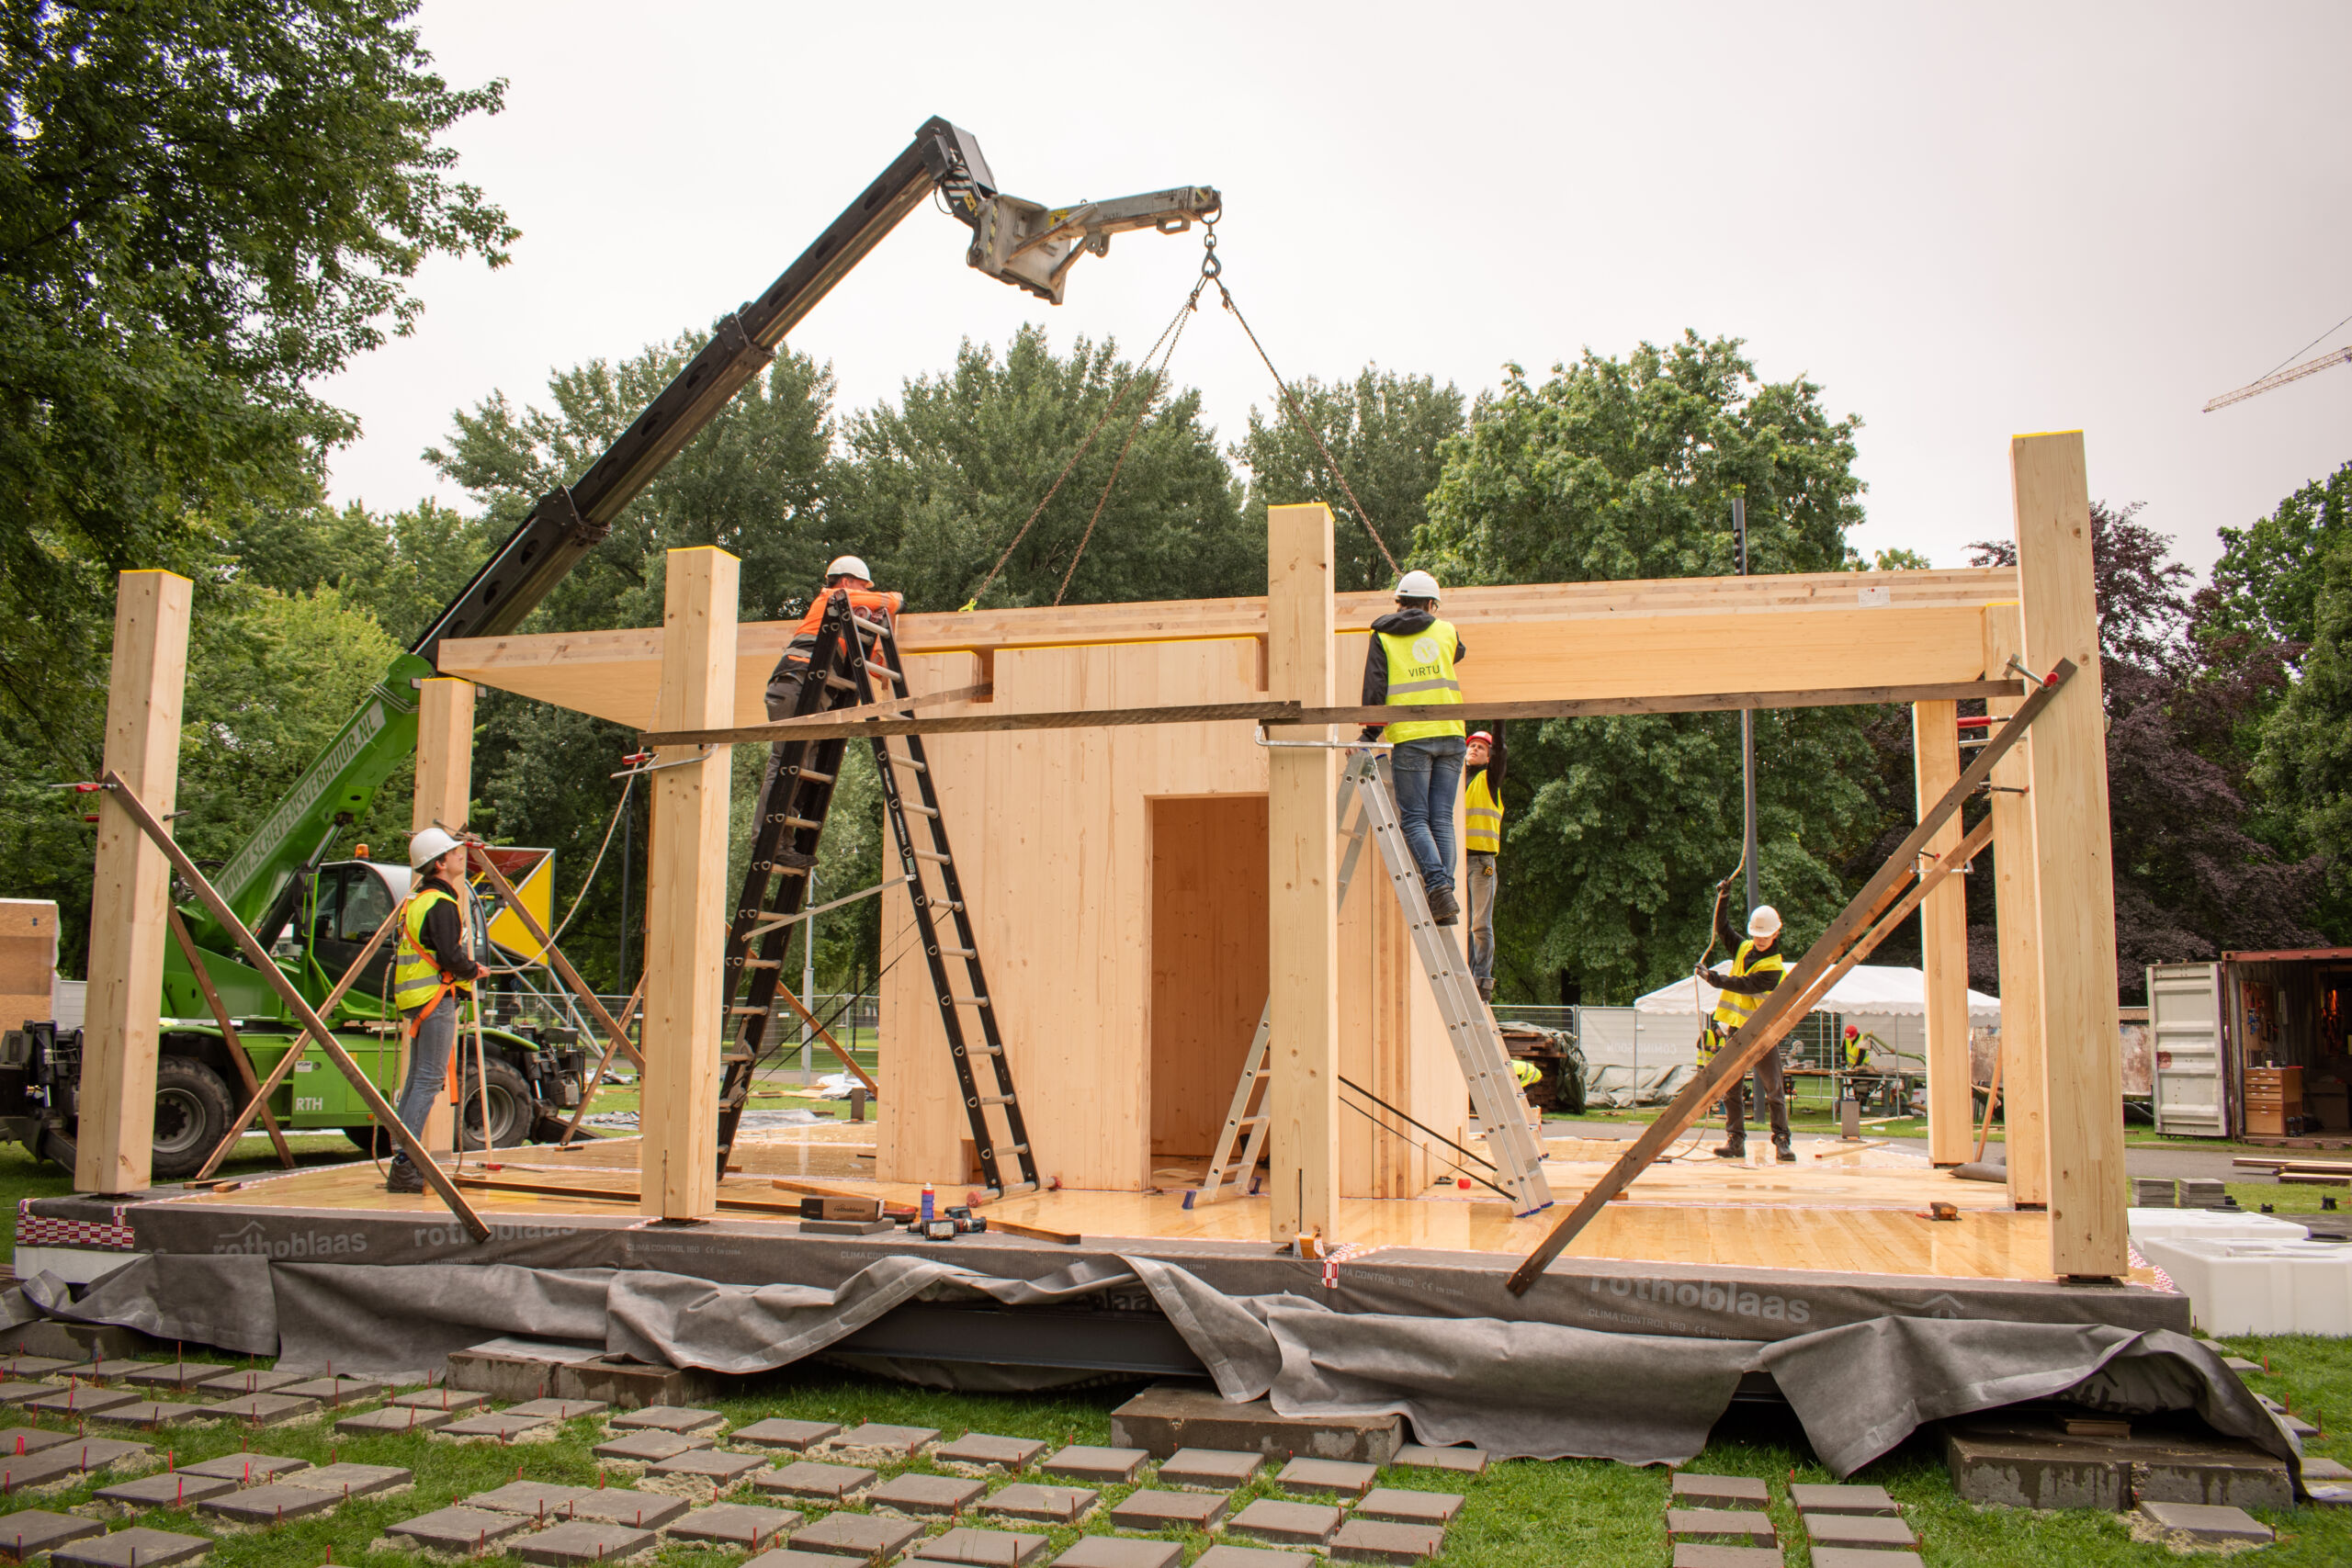 Universities team up to make housing construction fully circular and emission-free faster